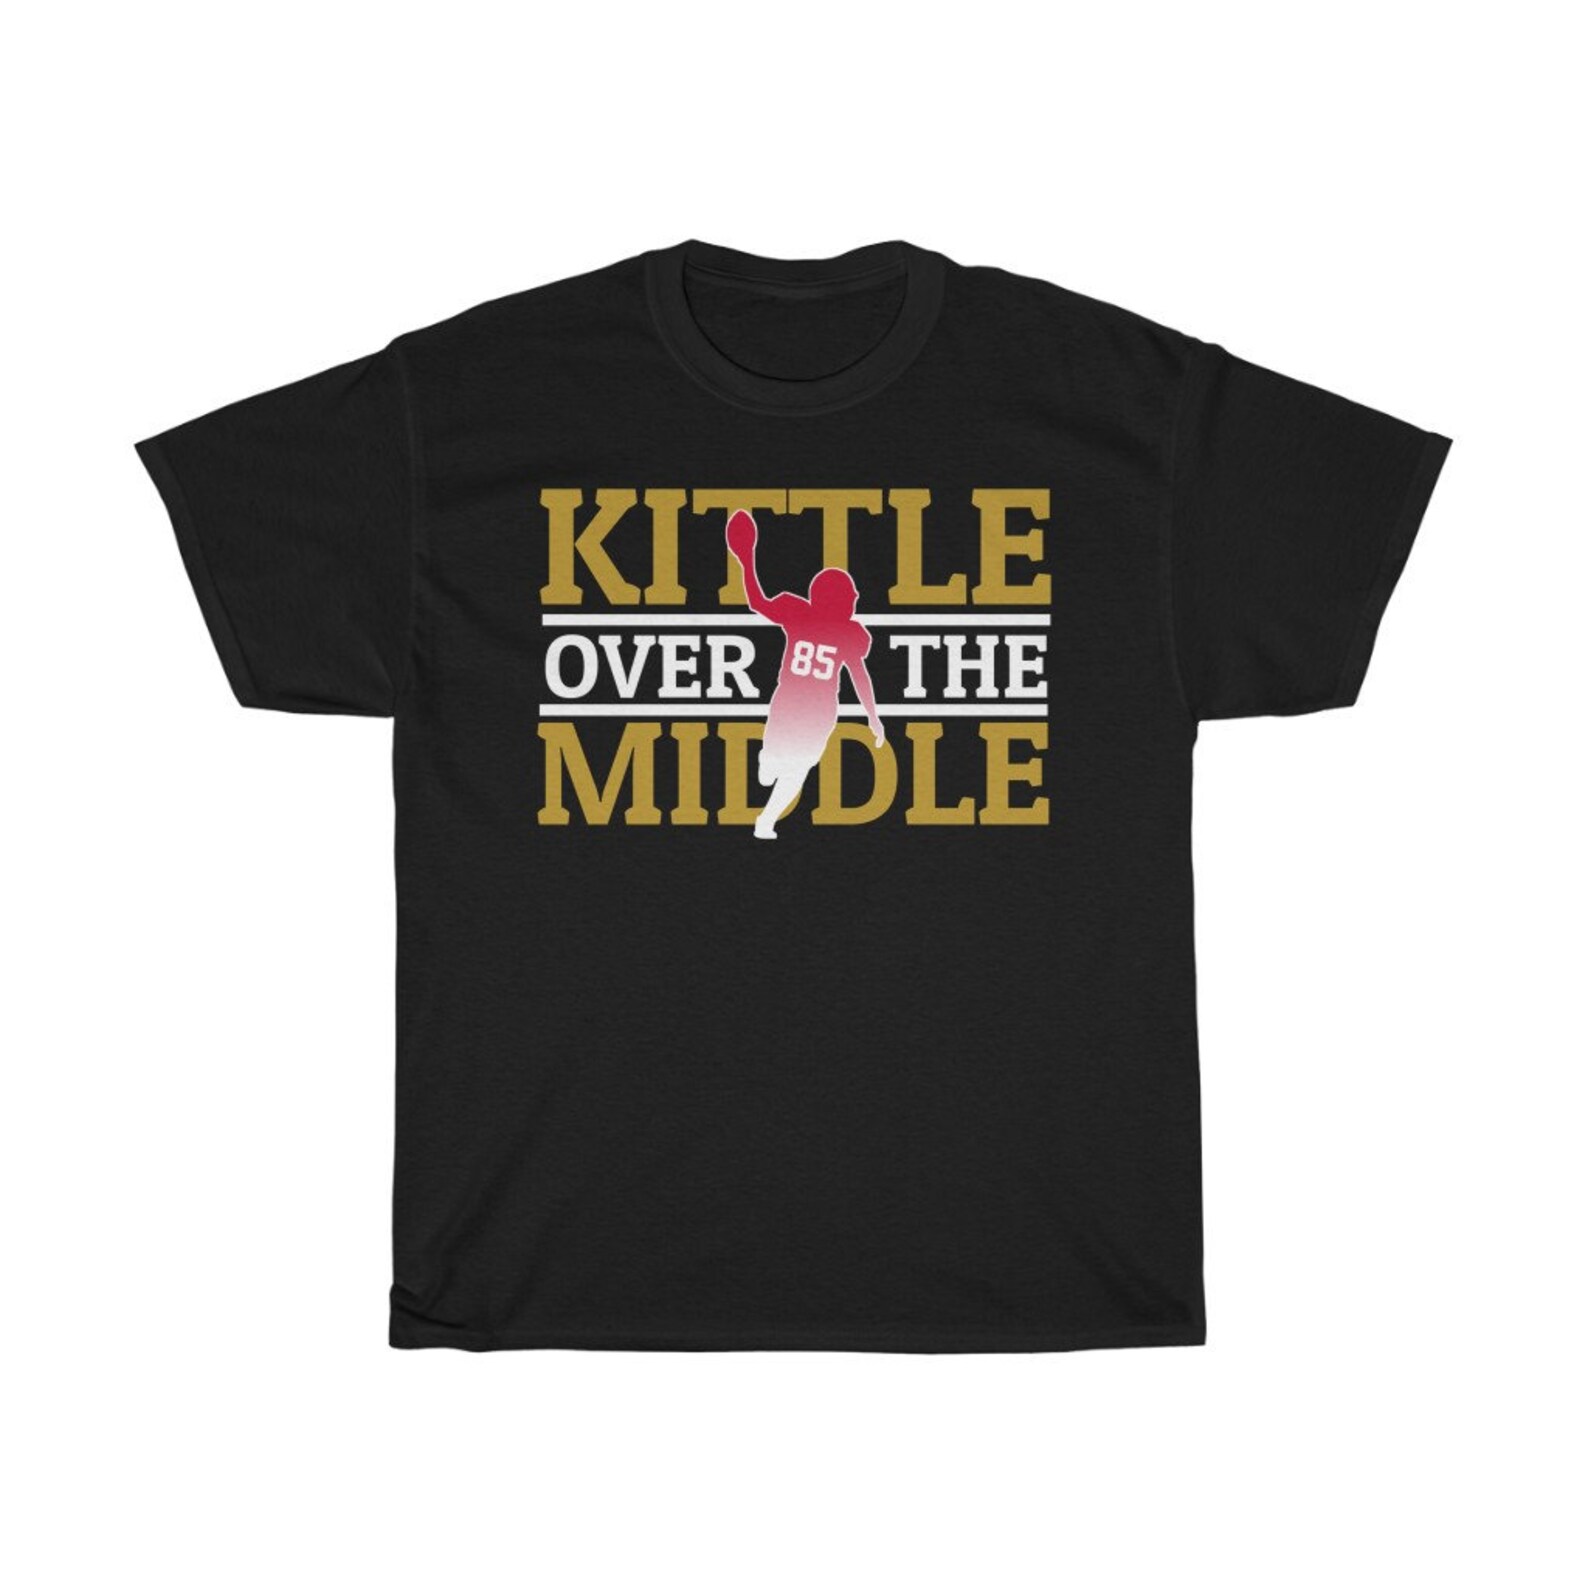 Kittle Over The Middle Classic T-Shirt For Men Women Funny | Etsy